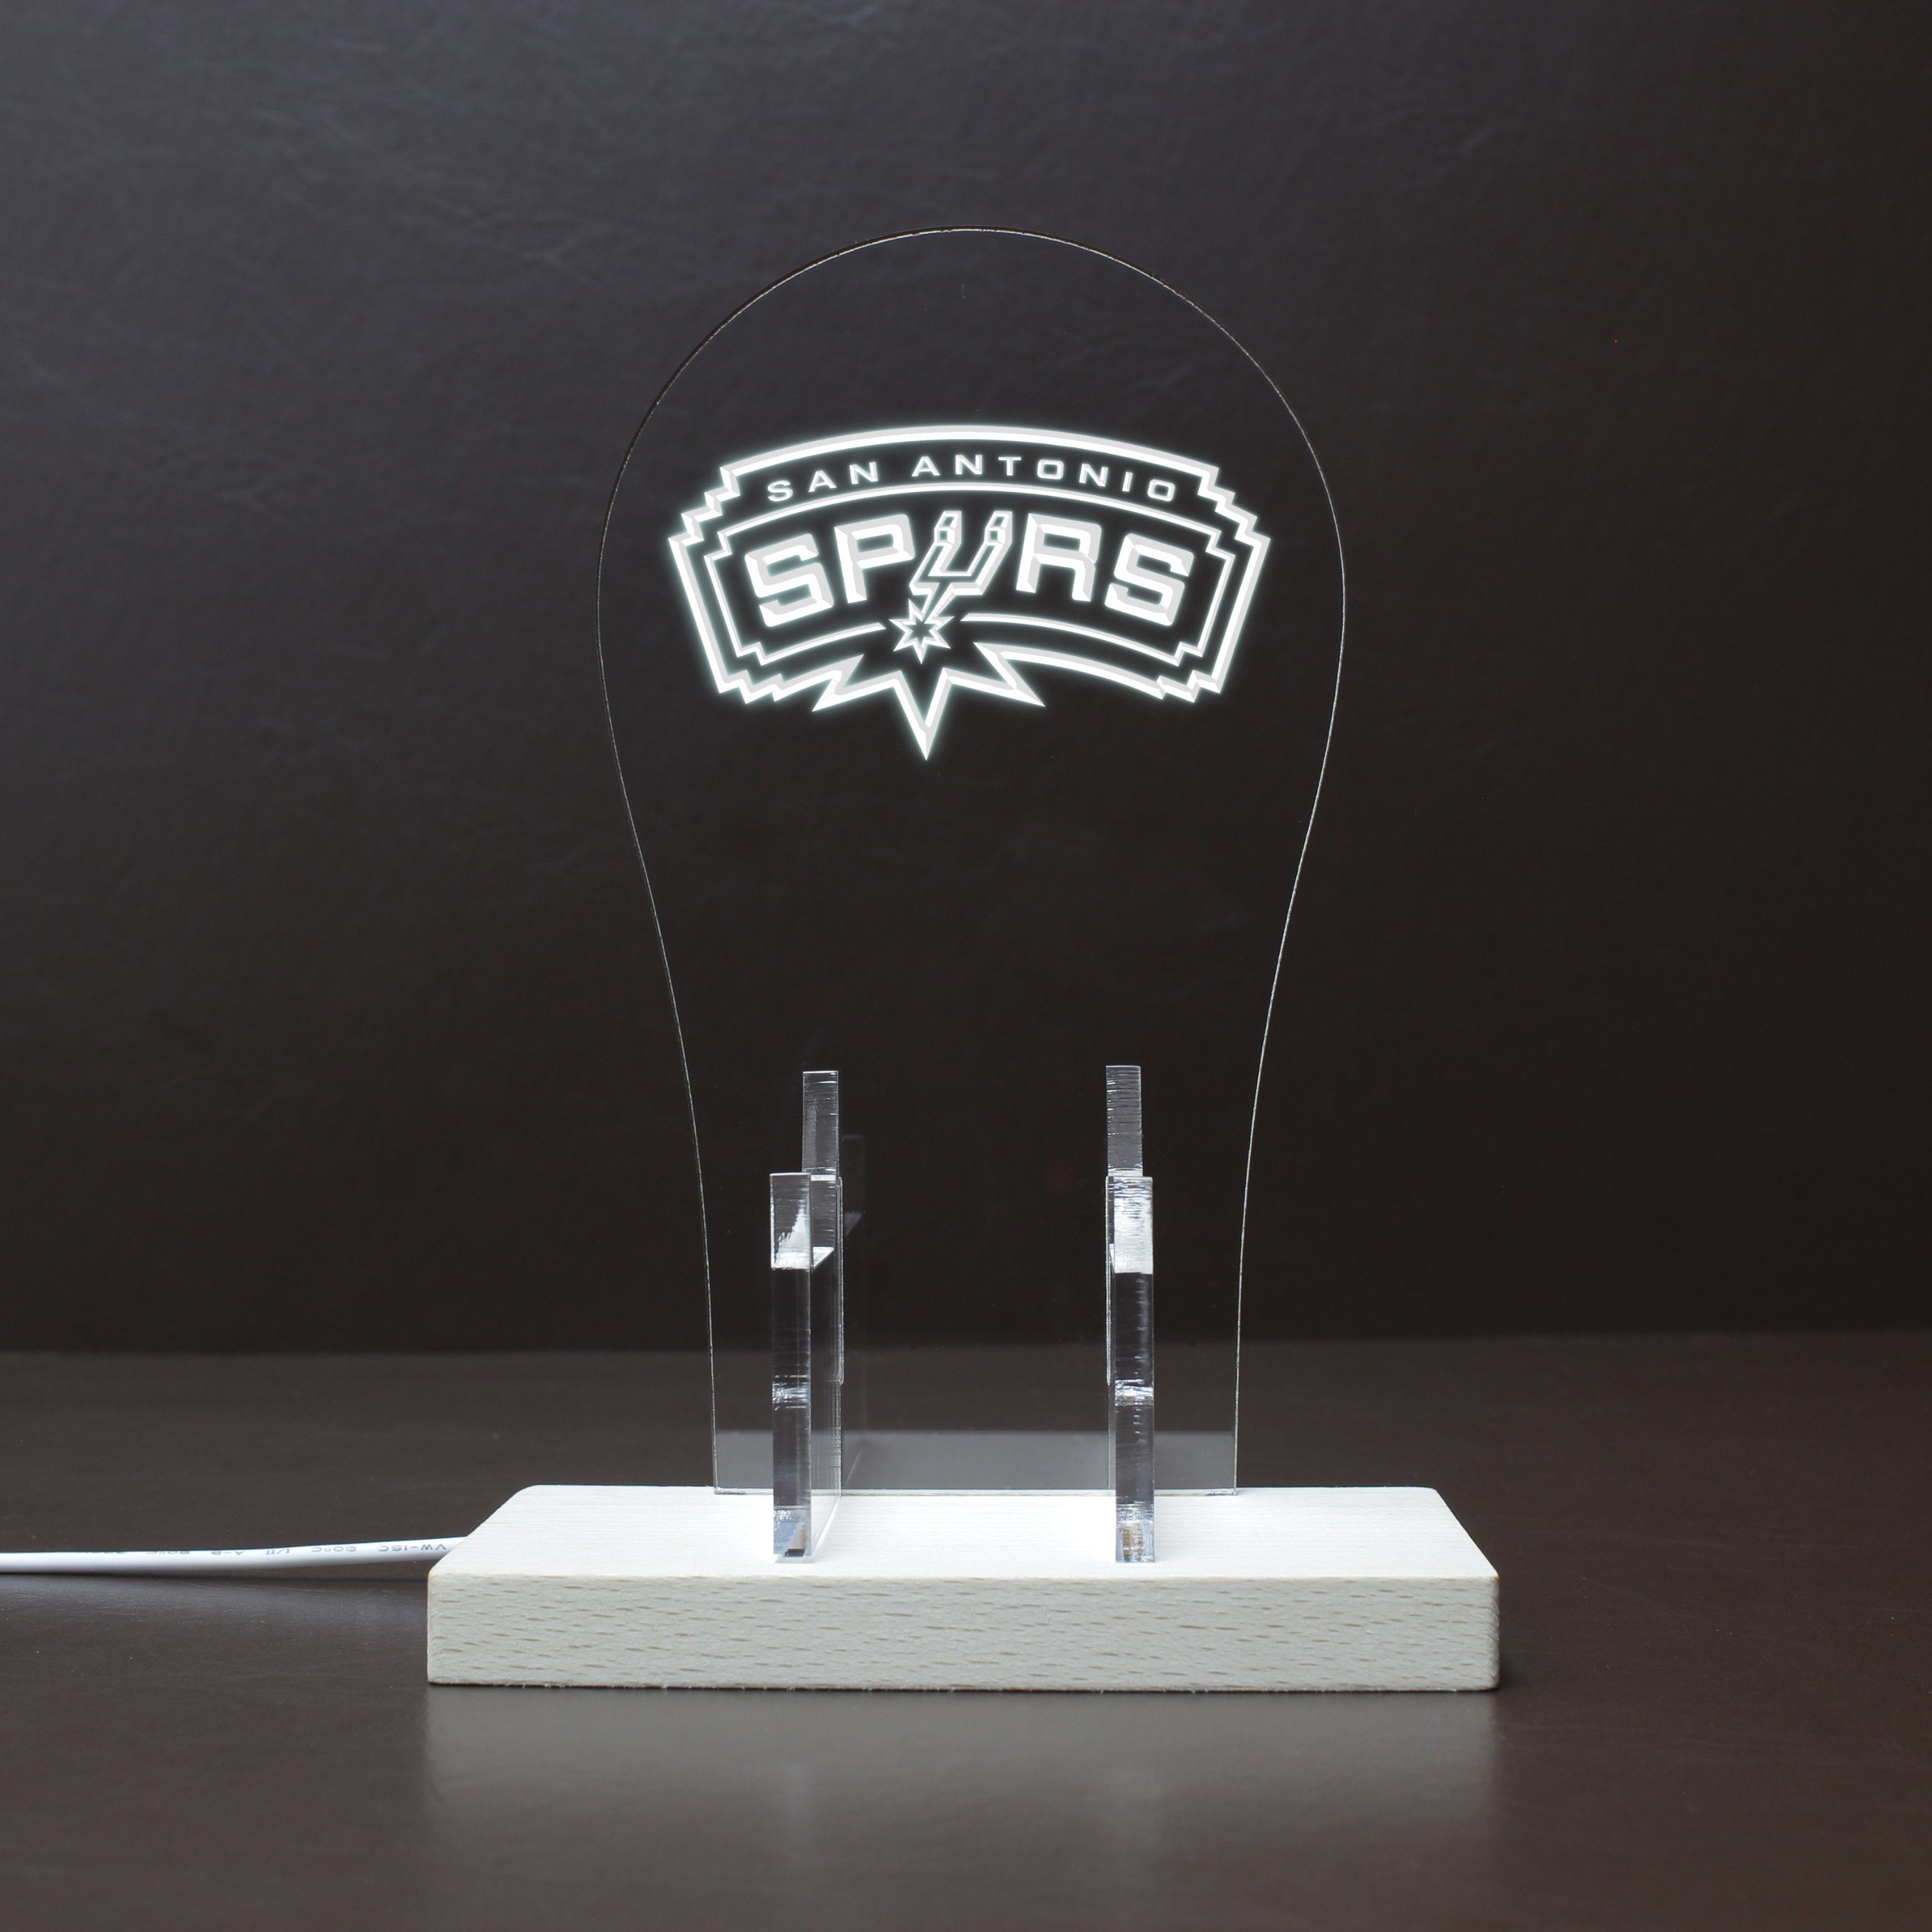 San Antonio Spurs LED Gaming Headset Controller Stand